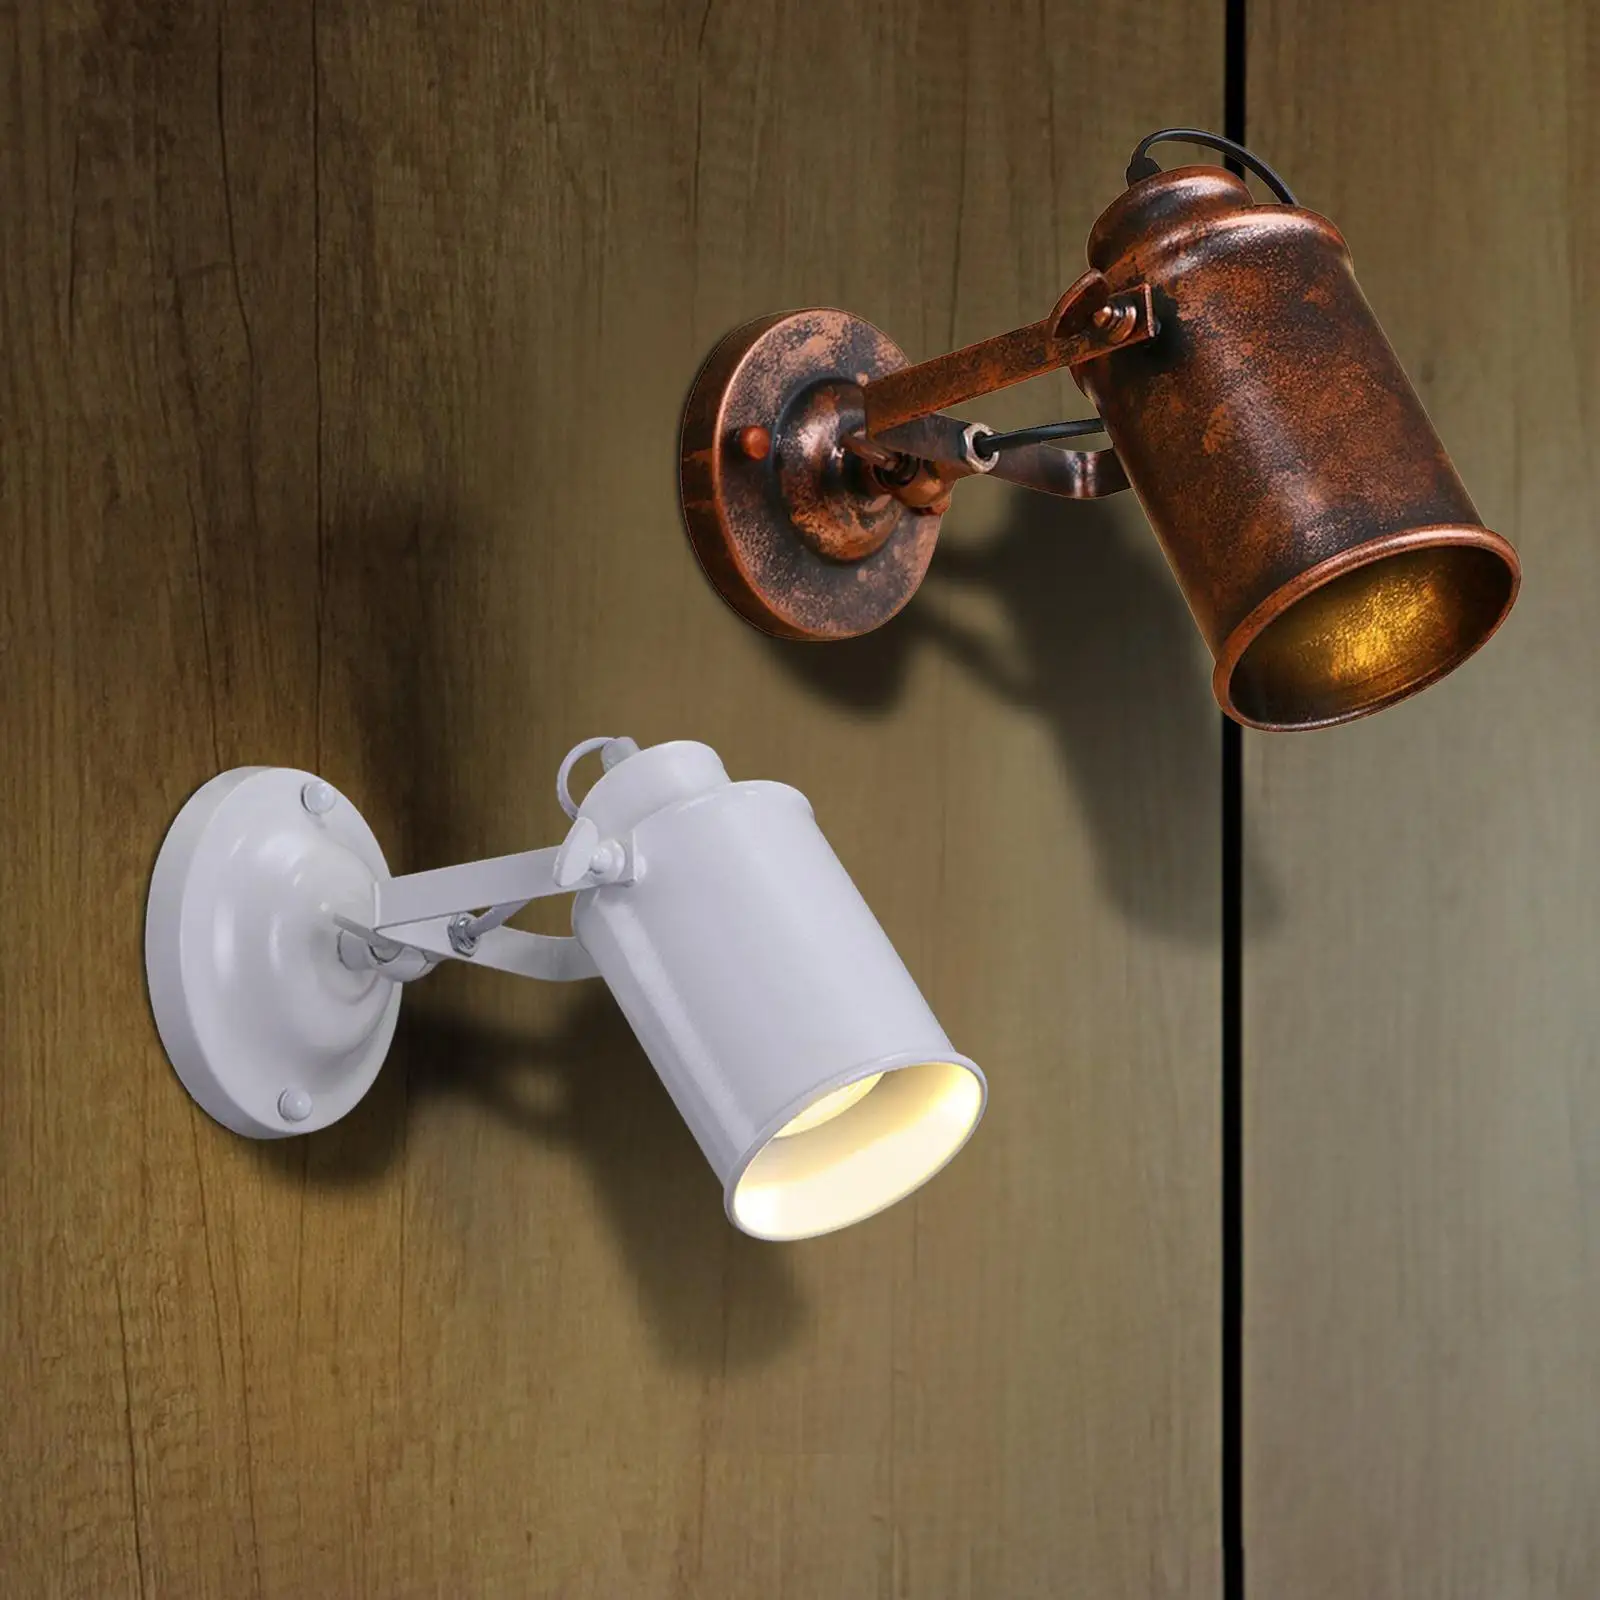 Industrial Wall Sconce Hardwired Wall Lamp Wall Mount Light Fixture Angle Adjustable Vintage Downlight Wall Light for Hotel Cafe